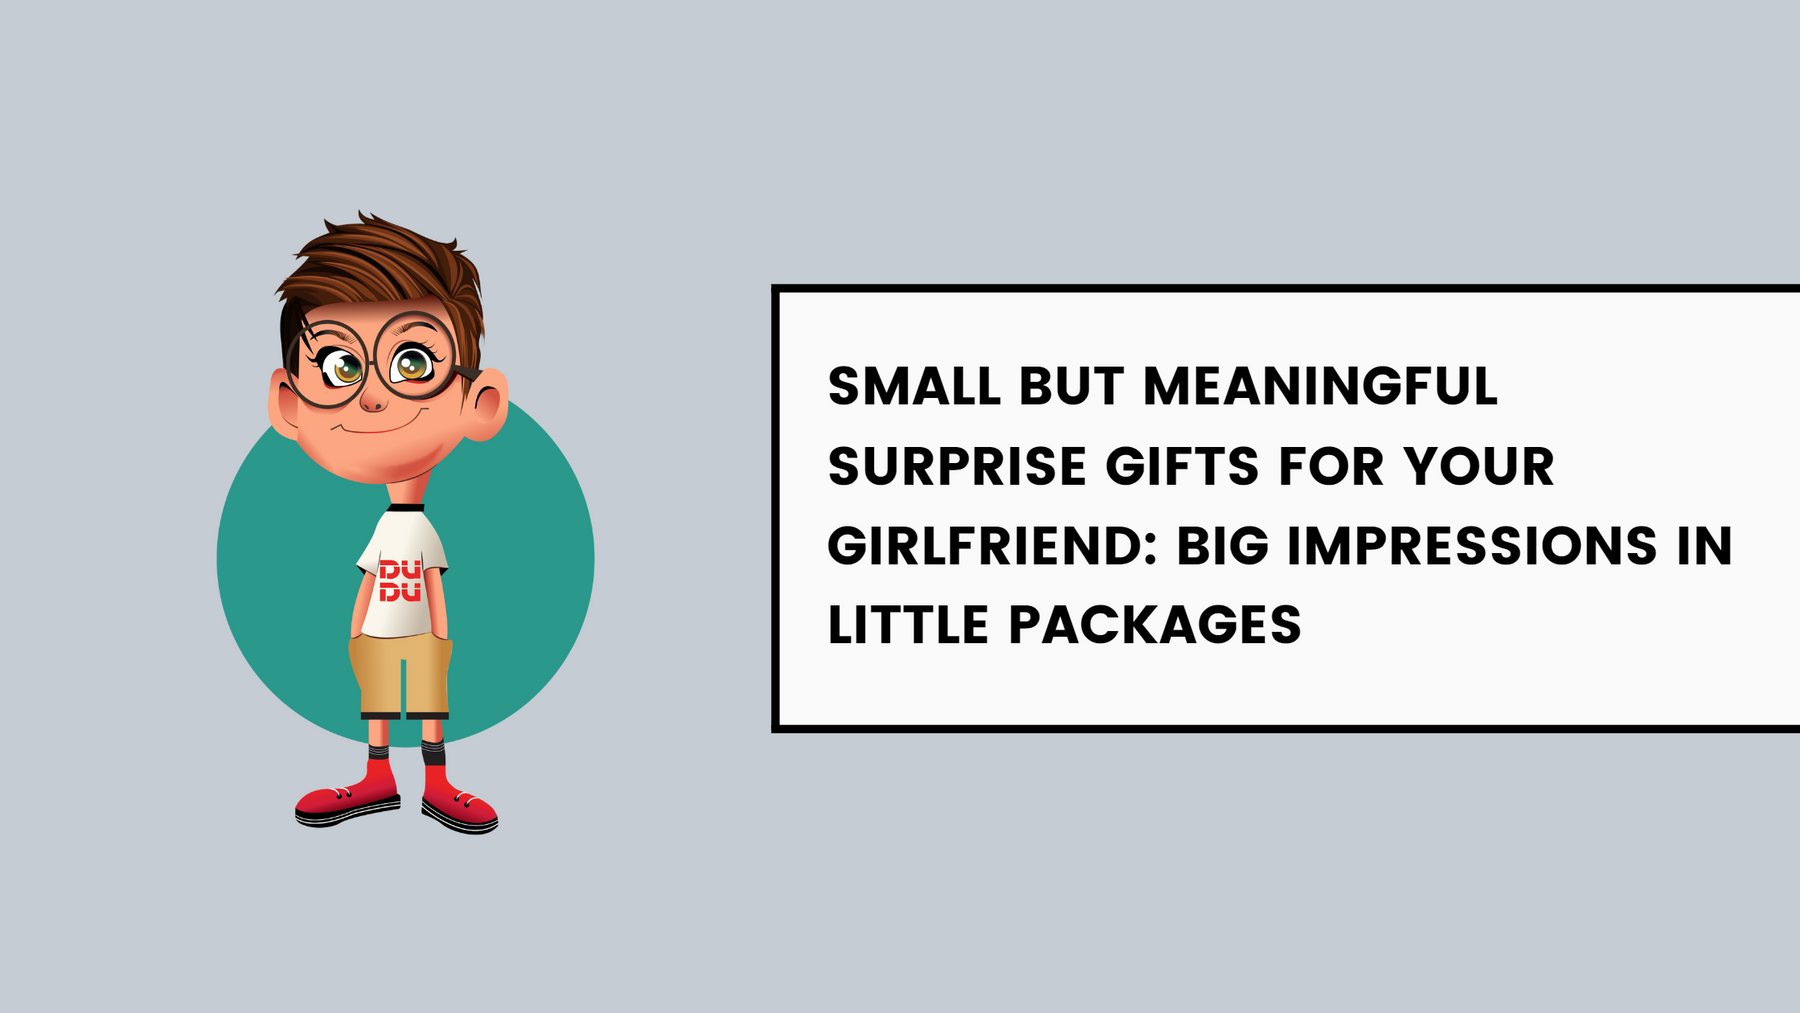 Small But Meaningful Surprise Gifts For Your Girlfriend: Big Impressions In Little Packages